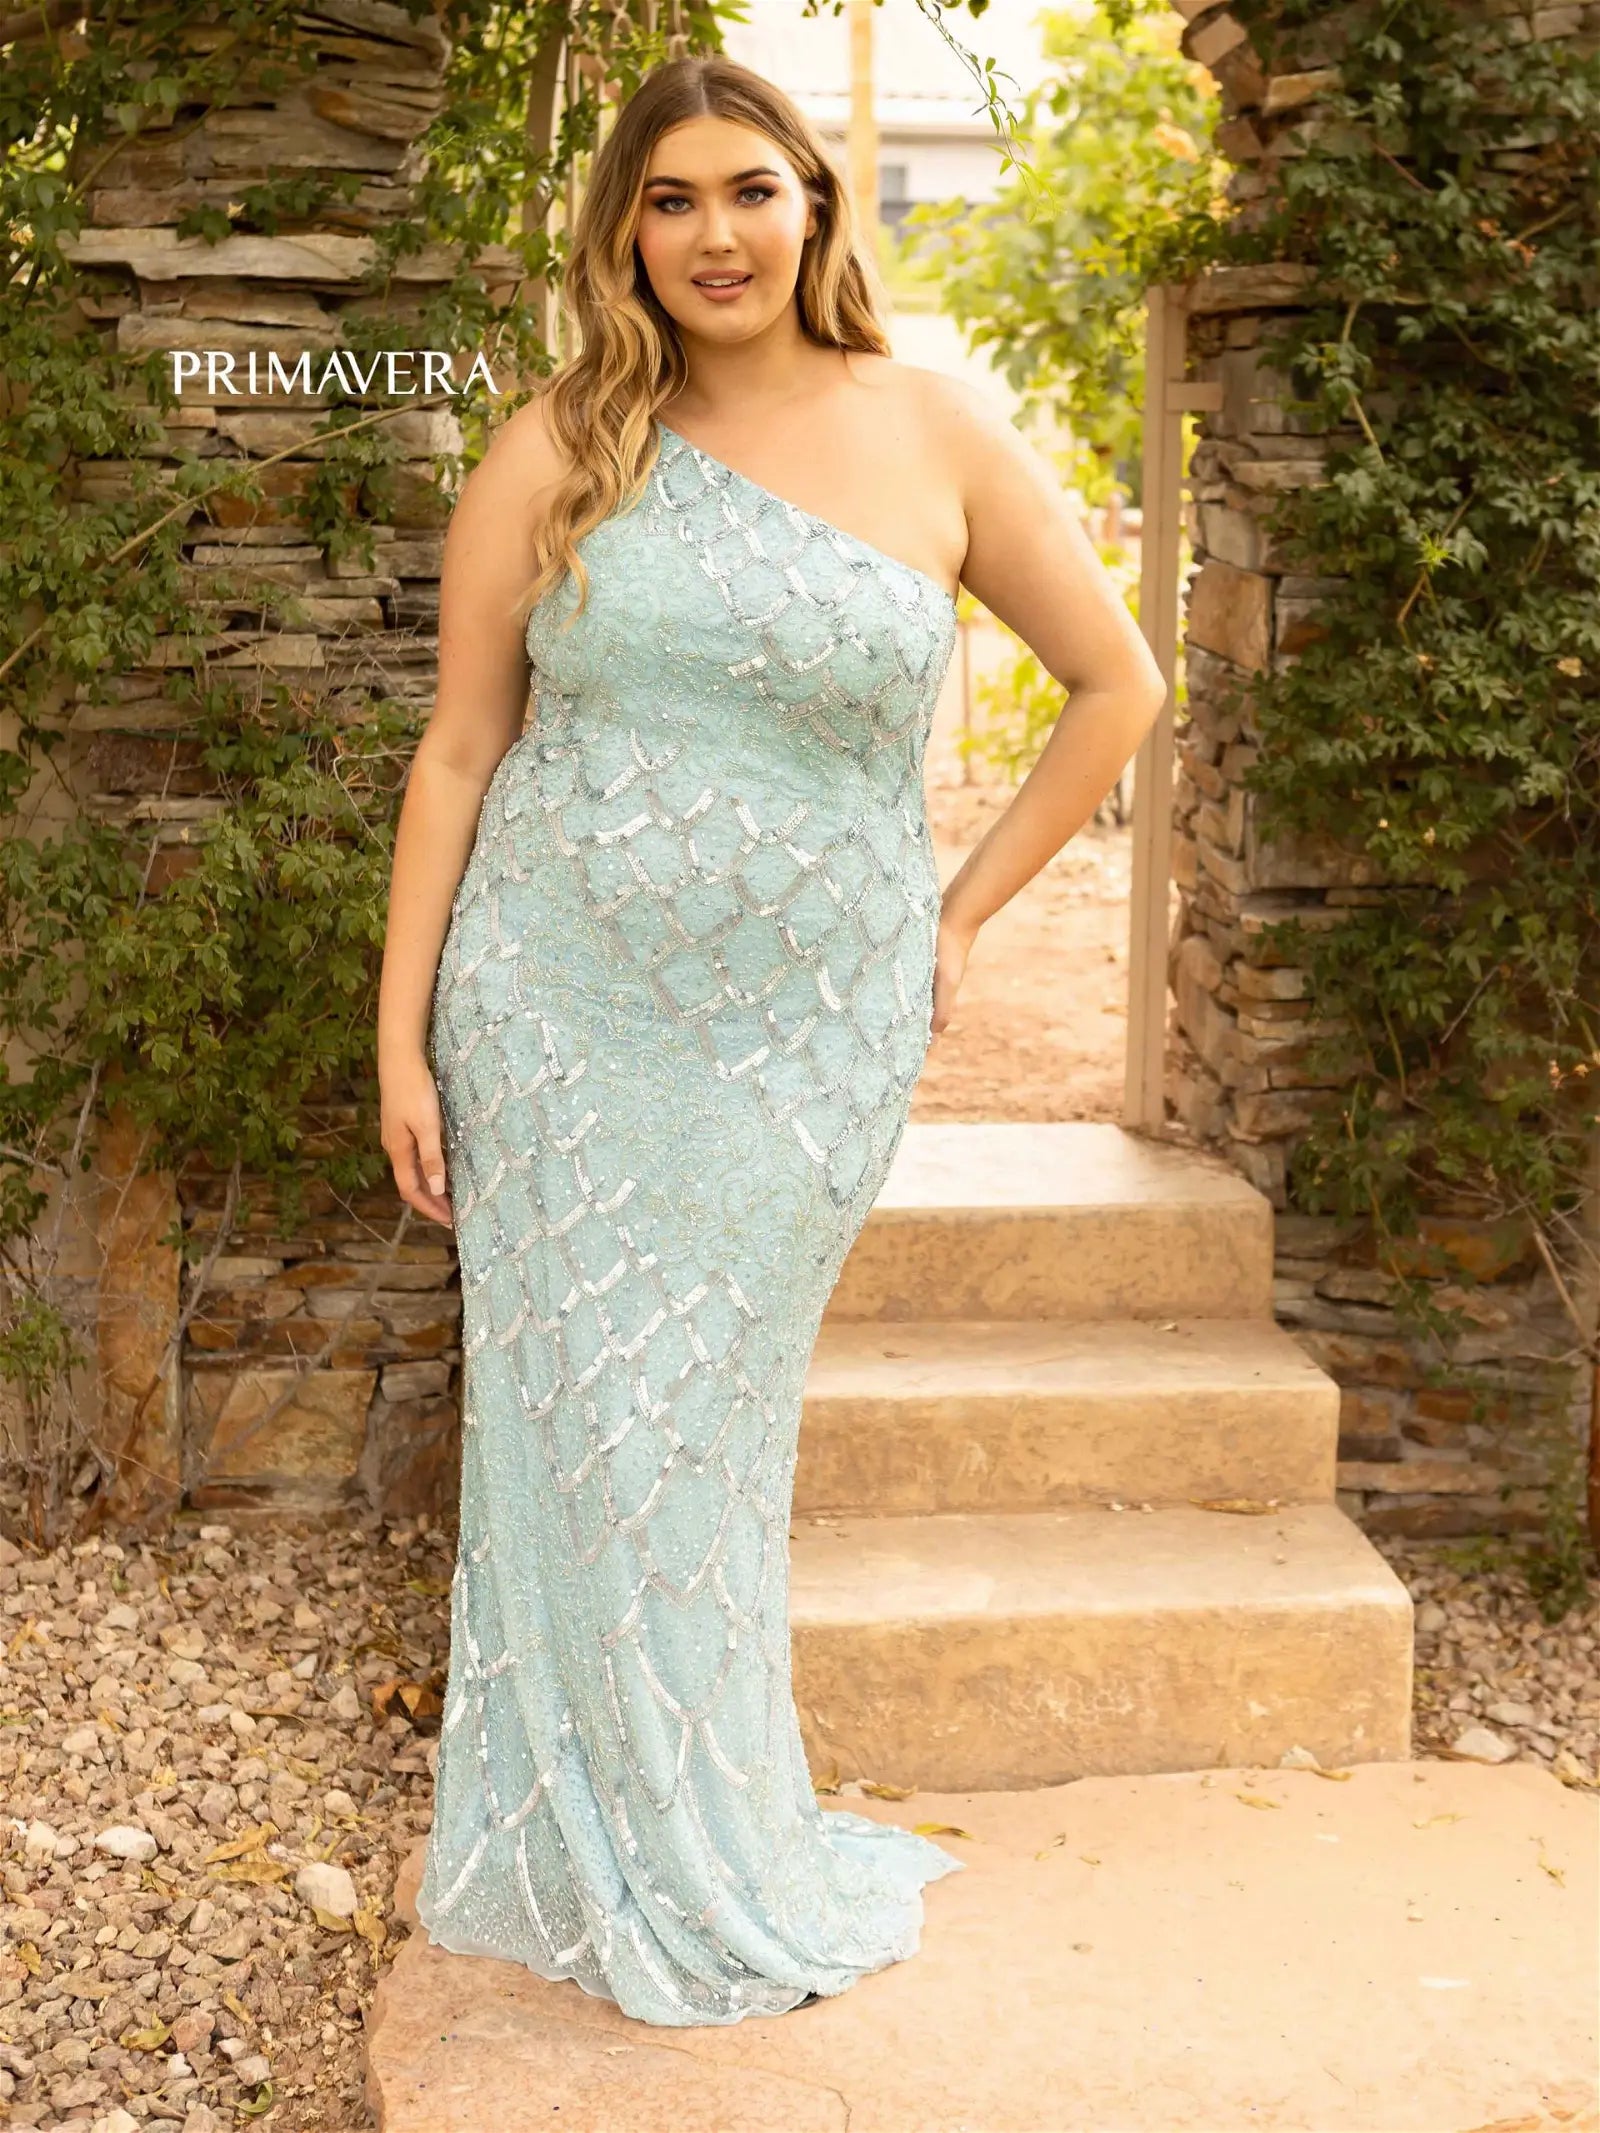 Primavera Couture 14002 Long Beaded Sequin Plus Size One Shoulder Prom Dress Formal Gown Curvy  Sizes: 14-24  Colors: LIGHT TURQUOISE, NEON PINK, ROYAL BLUE, BLACK, RED